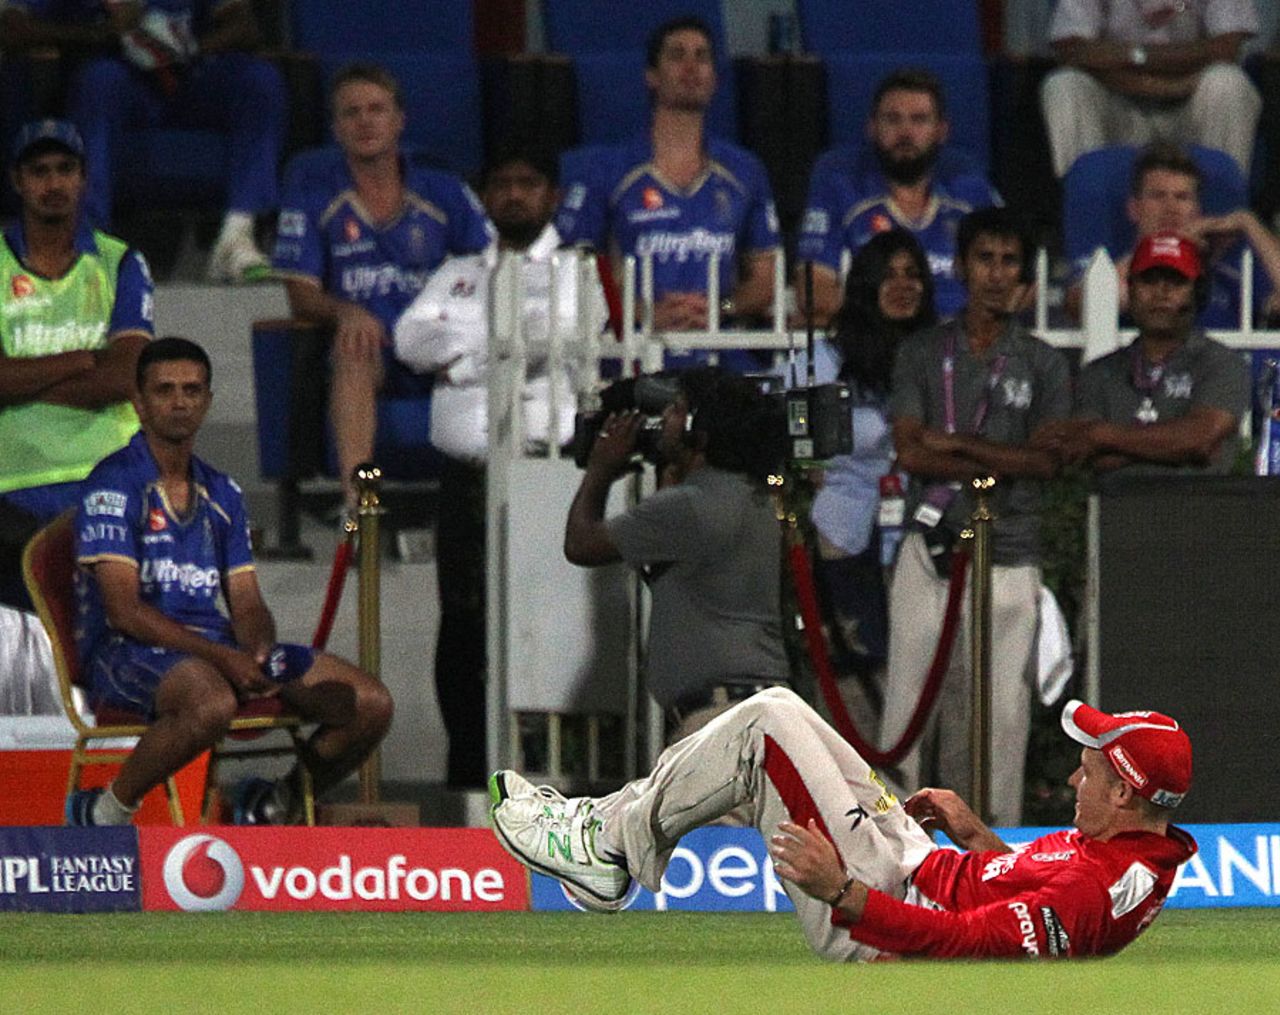 The ball is wedged between David Miller's legs after the ball slipped through his fingers, Rajasthan Royals v Kings XI Punjab, IPL 2014, Sharjah, April 20, 2014